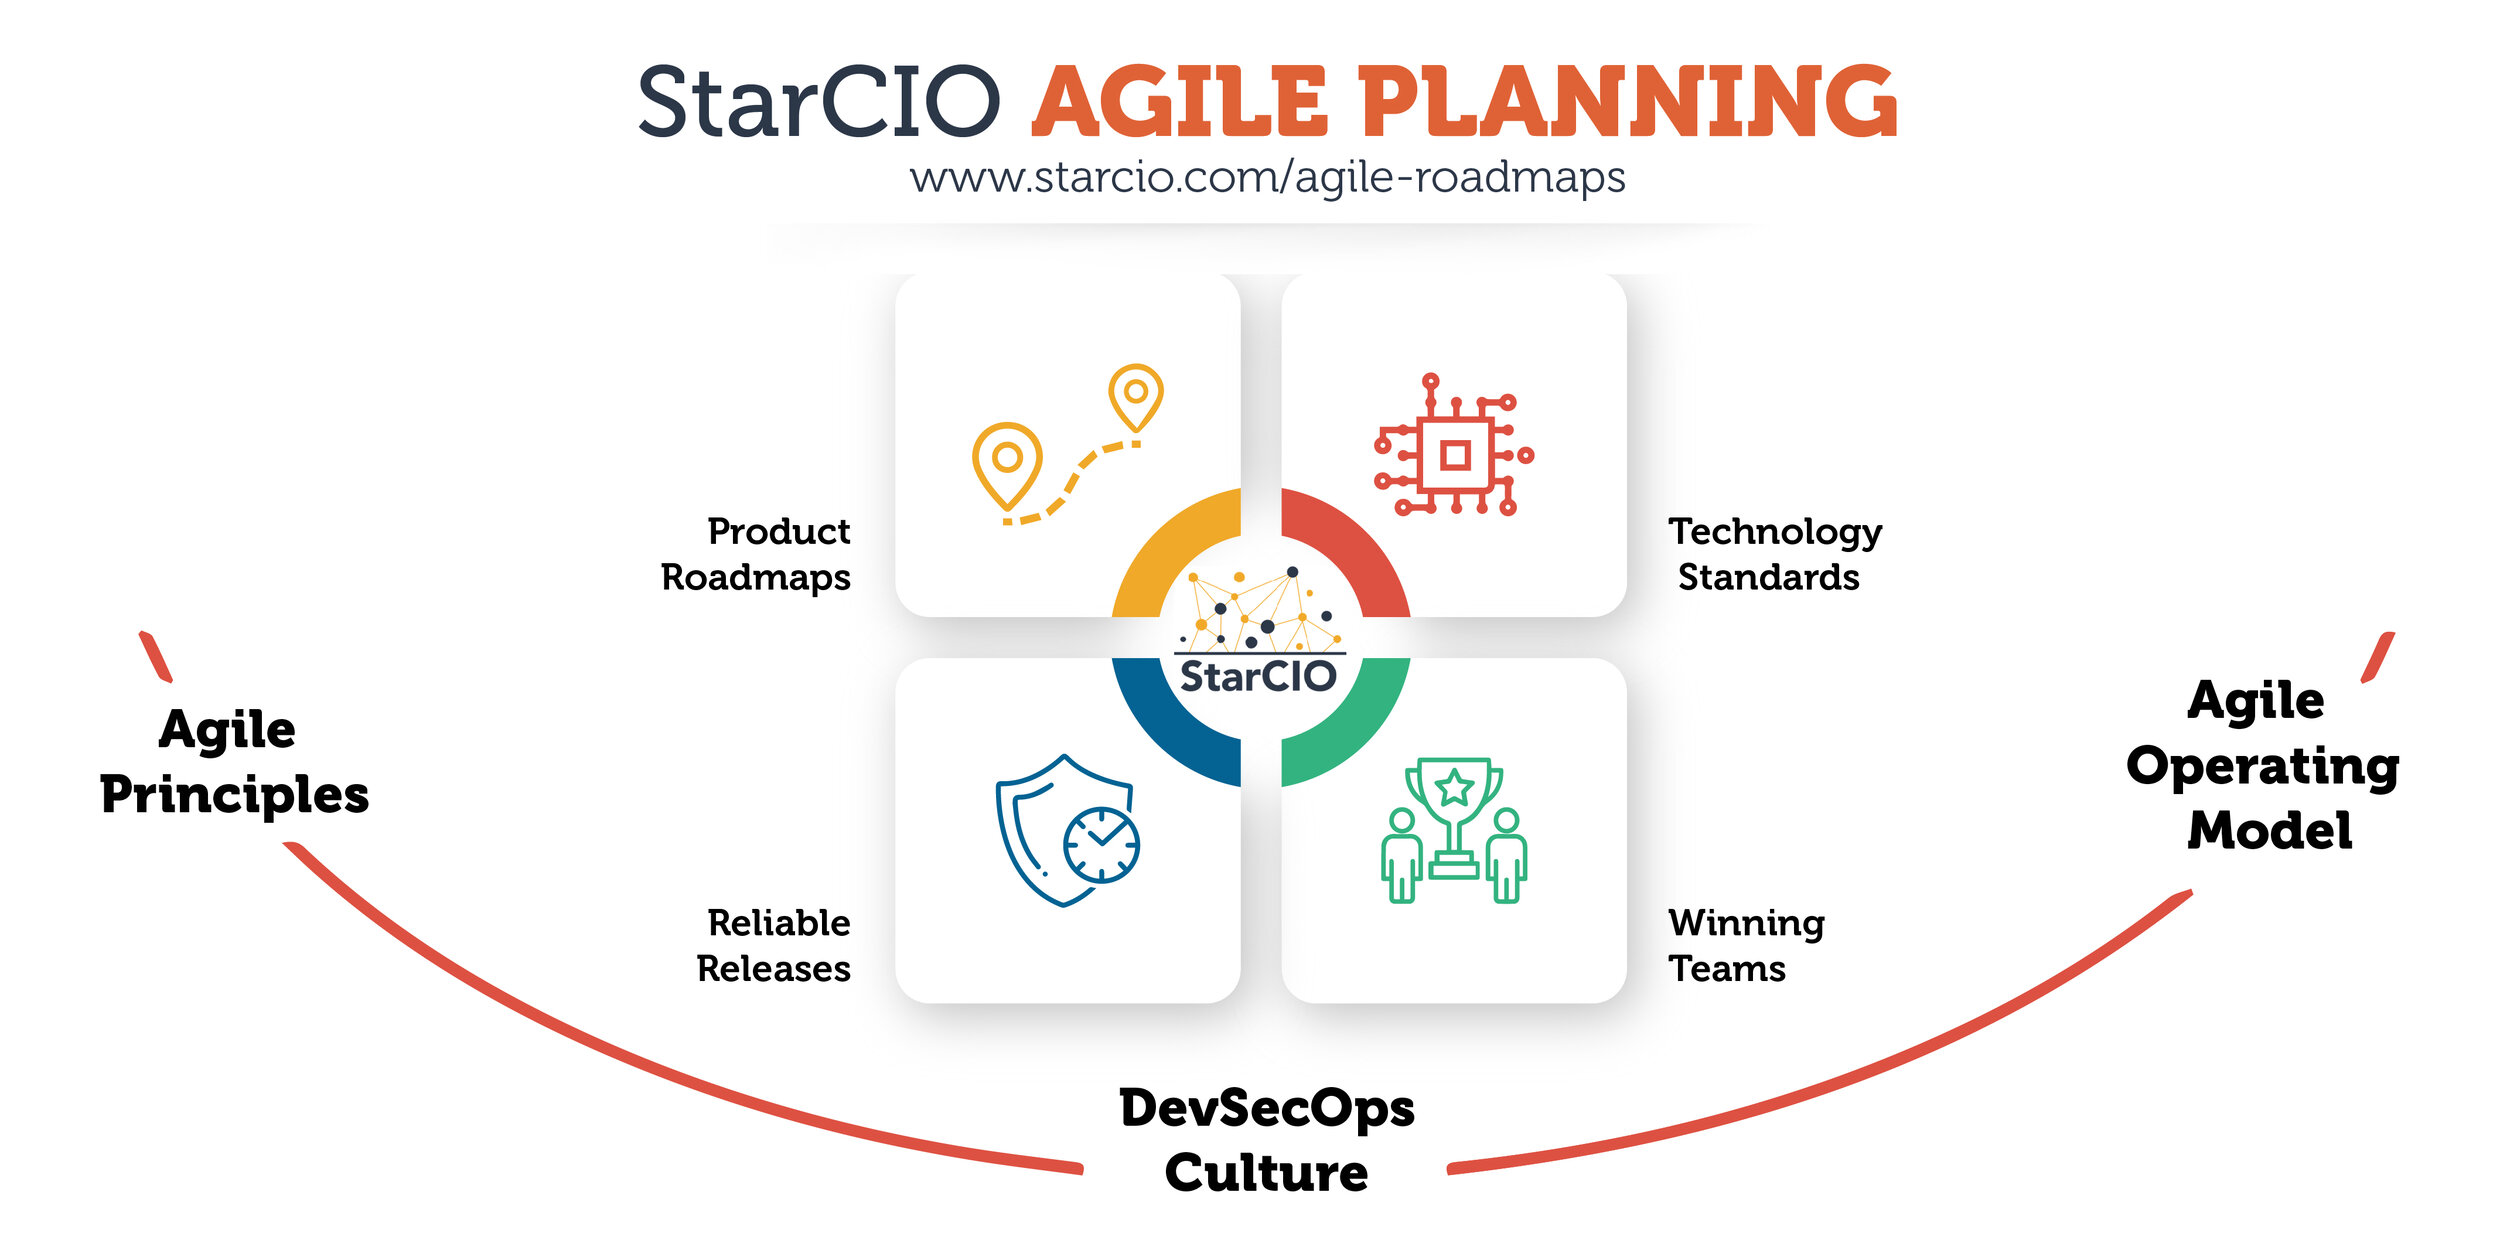 Agile Continuous Planning to Deliver Solid Roadmaps